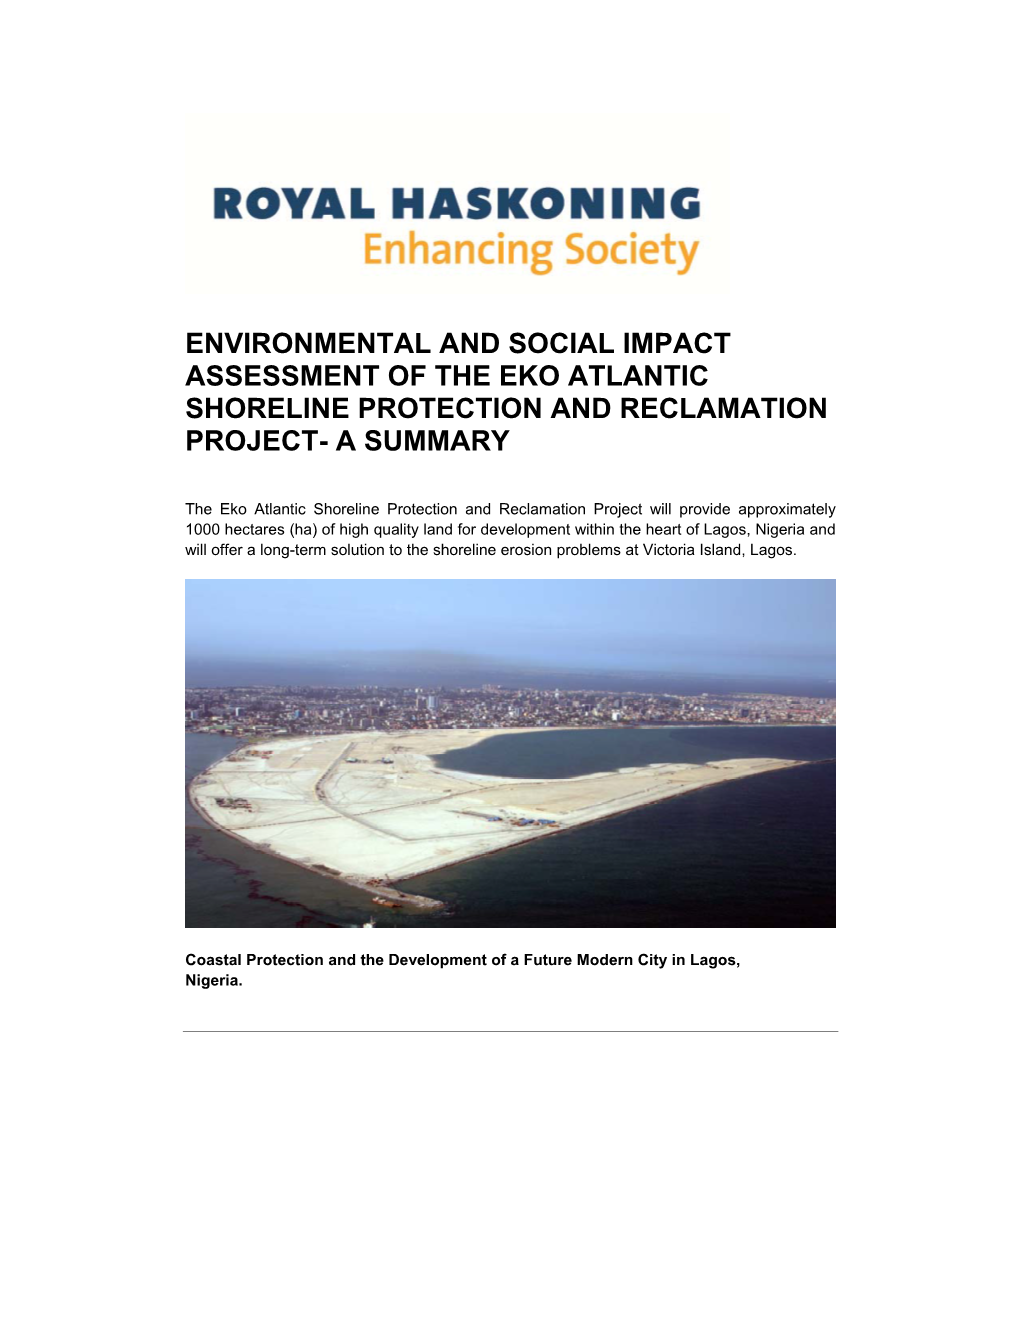 Environmental and Social Impact Assessment of the Eko Atlantic Shoreline Protection and Reclamation Project- a Summary